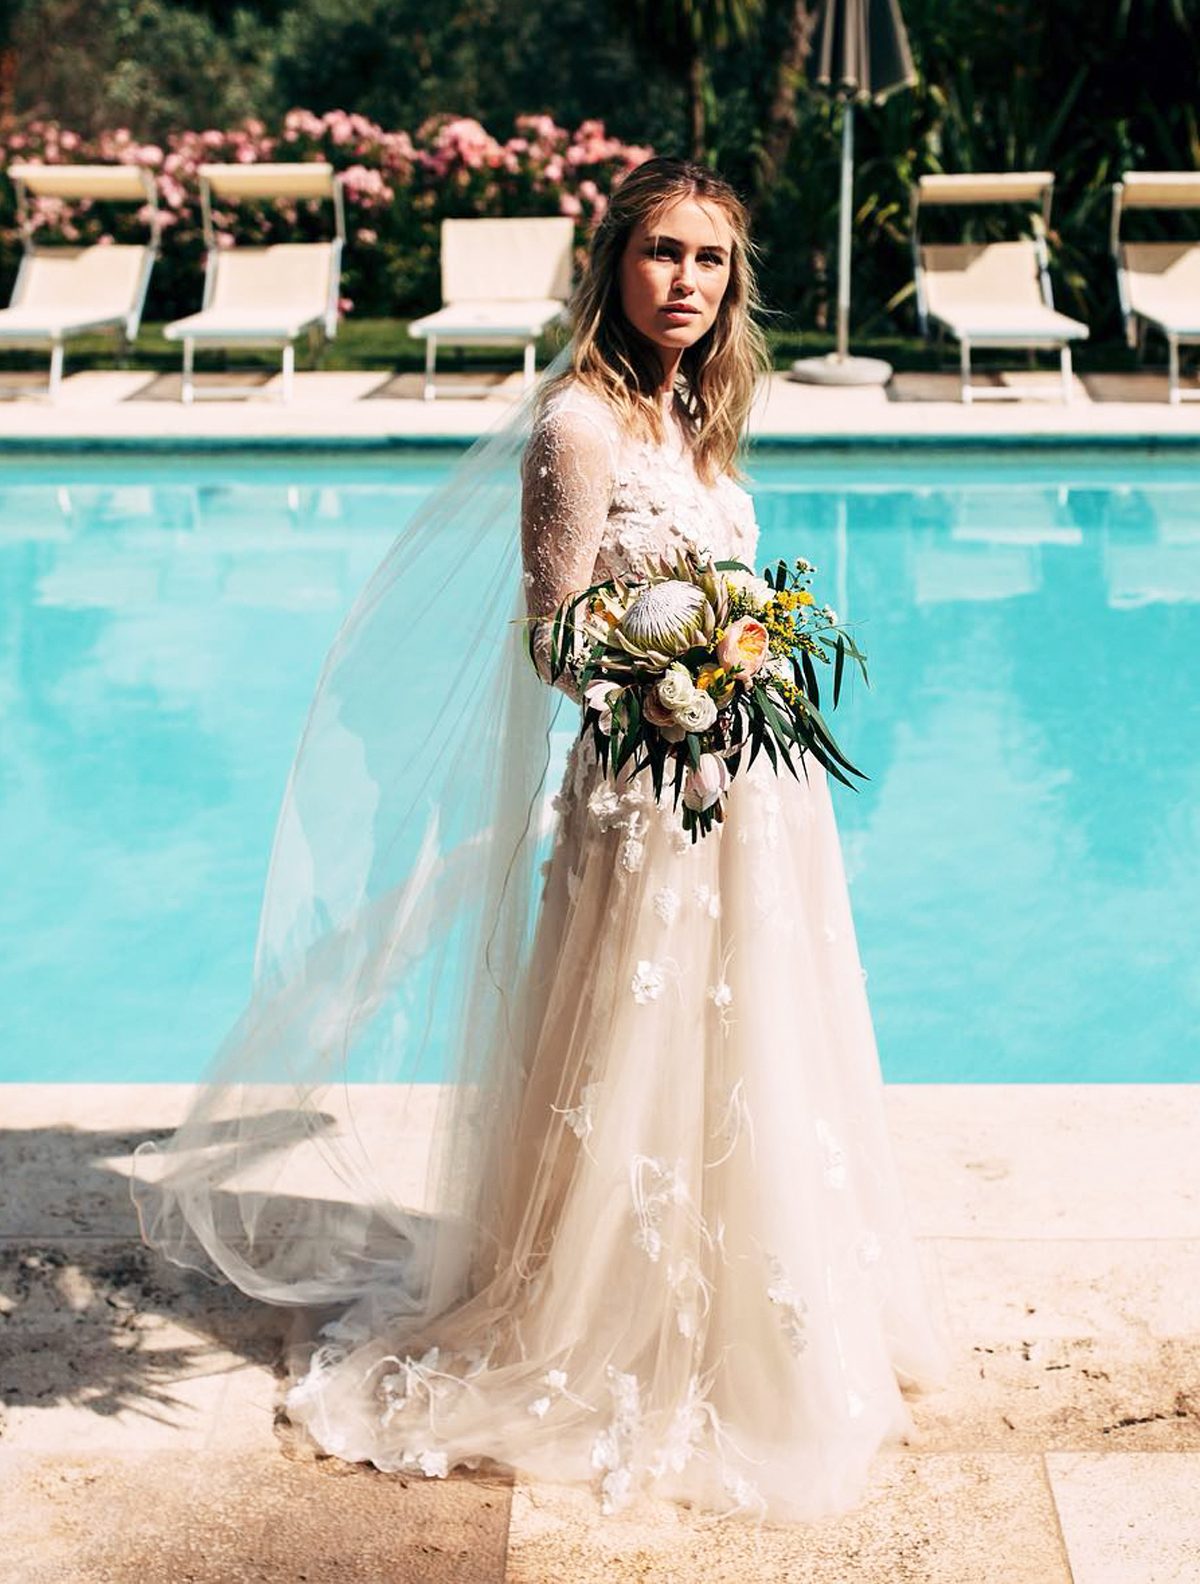 Top Bohemian Style Wedding Dresses Uk in the world Learn more here 